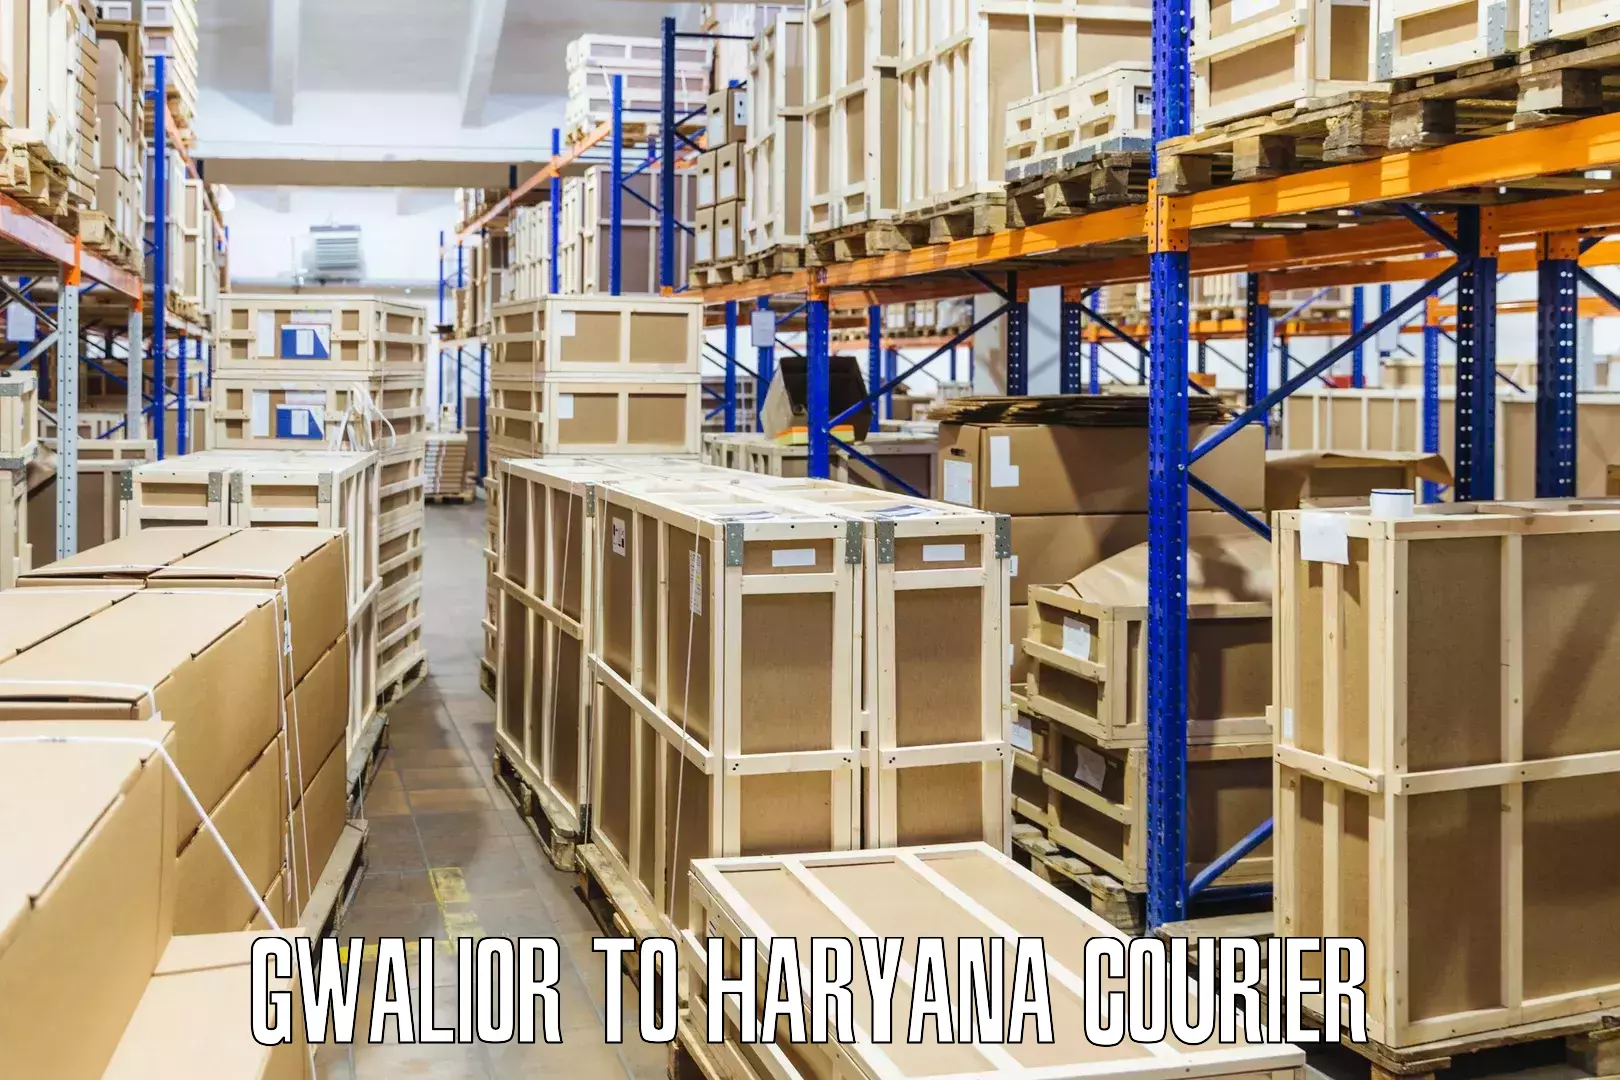 Online shipping calculator Gwalior to NCR Haryana